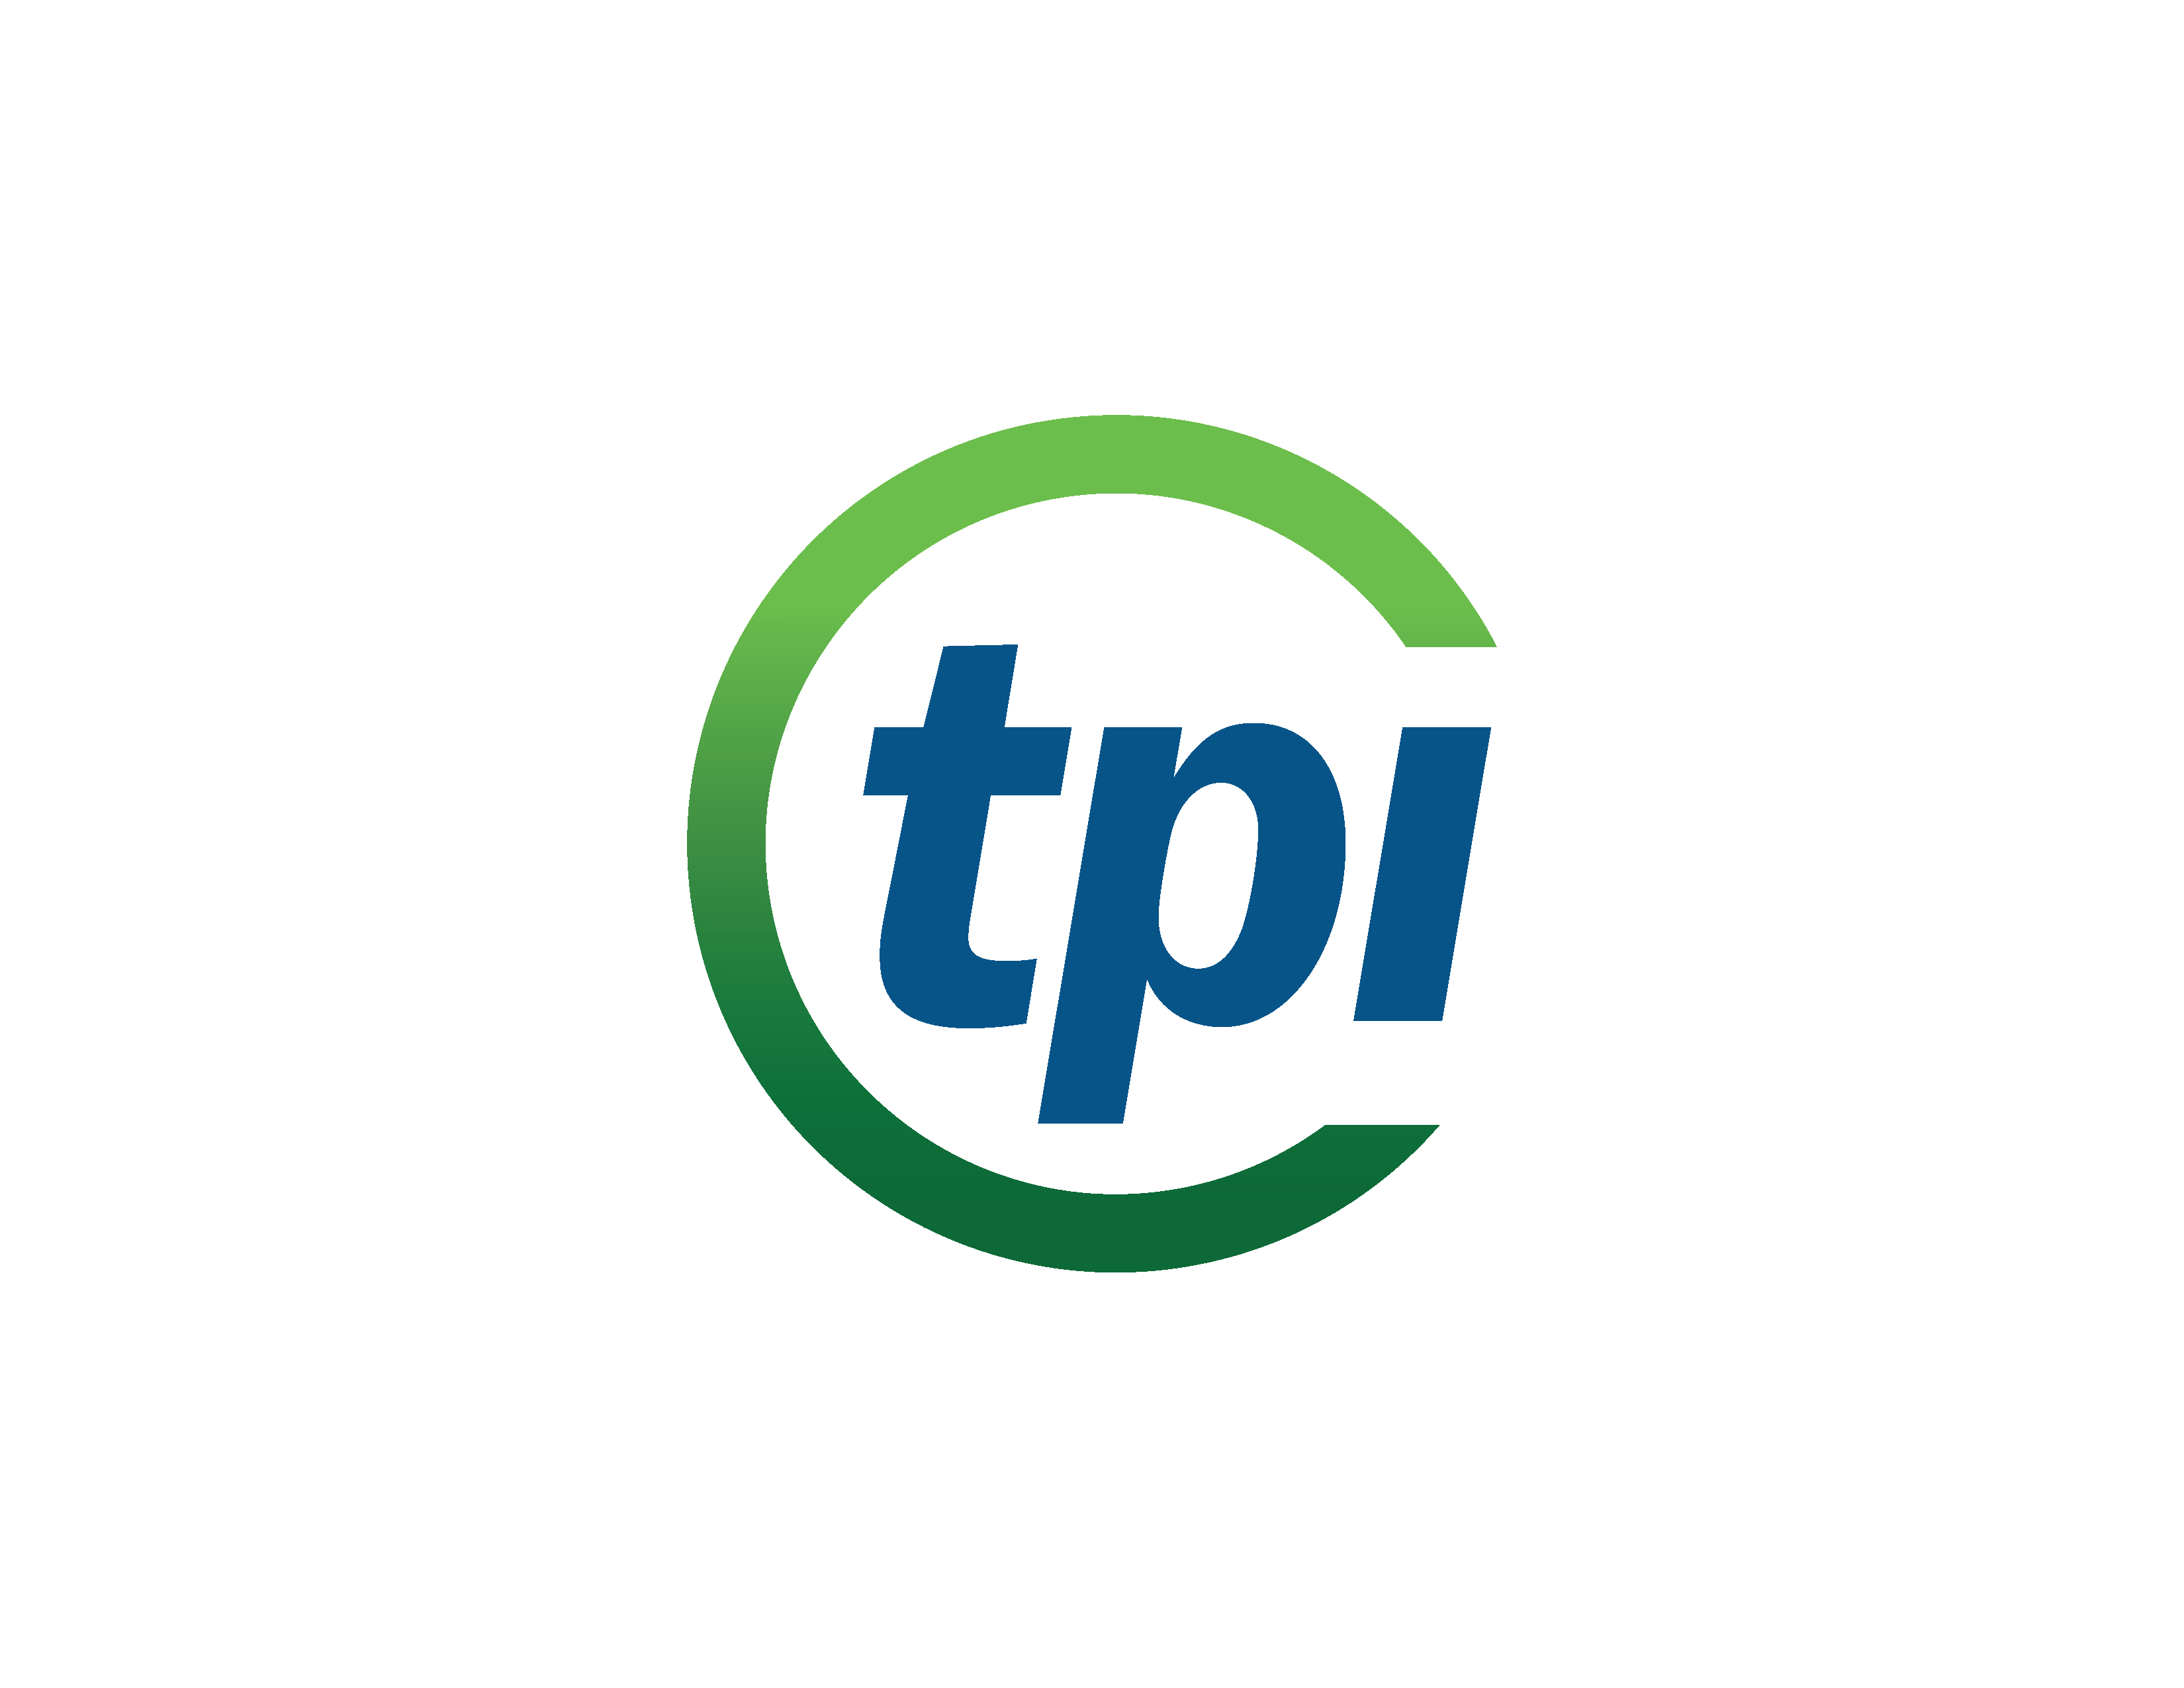 TPI Composites, Inc. Publishes its Annual Sustainability Report Reaffirming Its Commitments to a Zero-Harm Culture and Carbon Neutrality